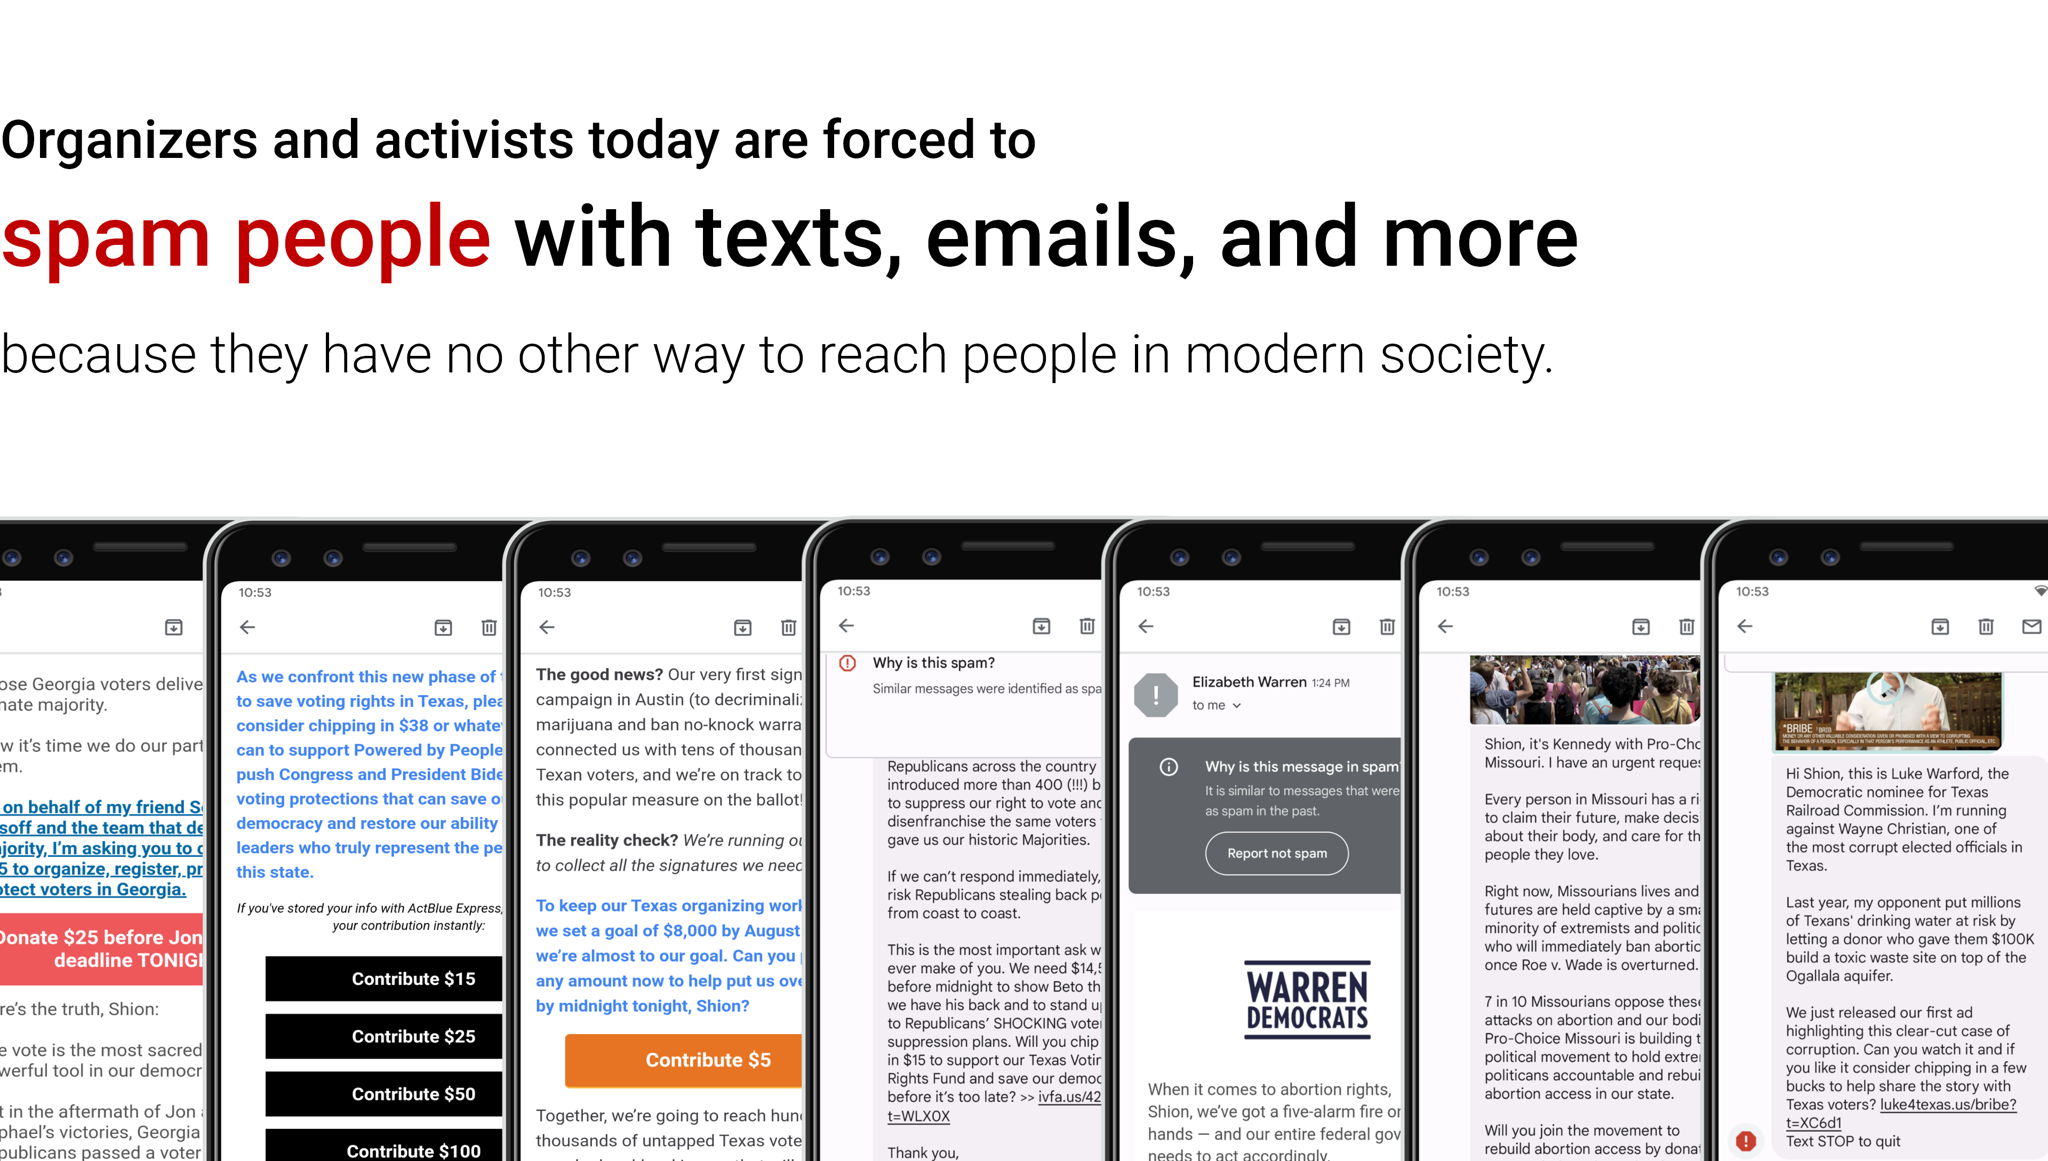 Organizers and activists today are forced to spam people with texts, emails, and more because they have no other way to reach people in modern society.